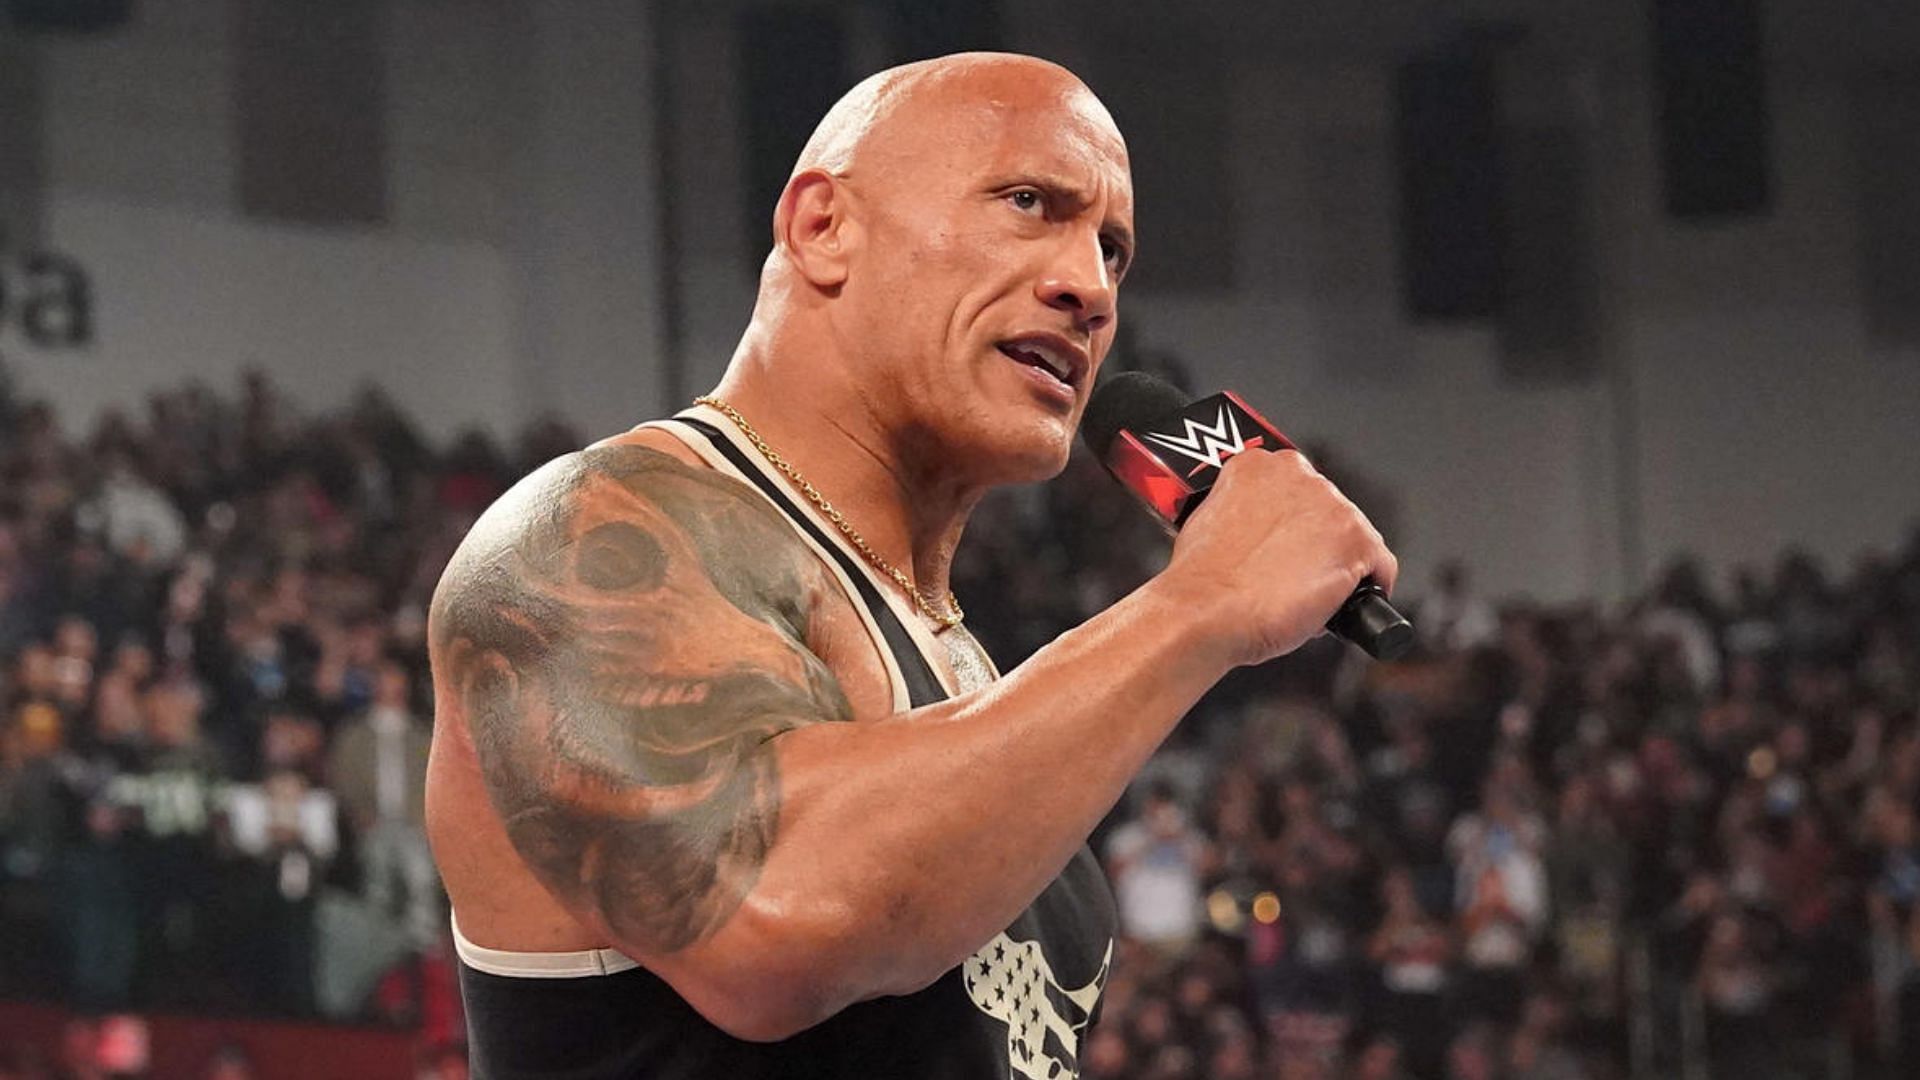 The Rock recently returned to Monday Night RAW!